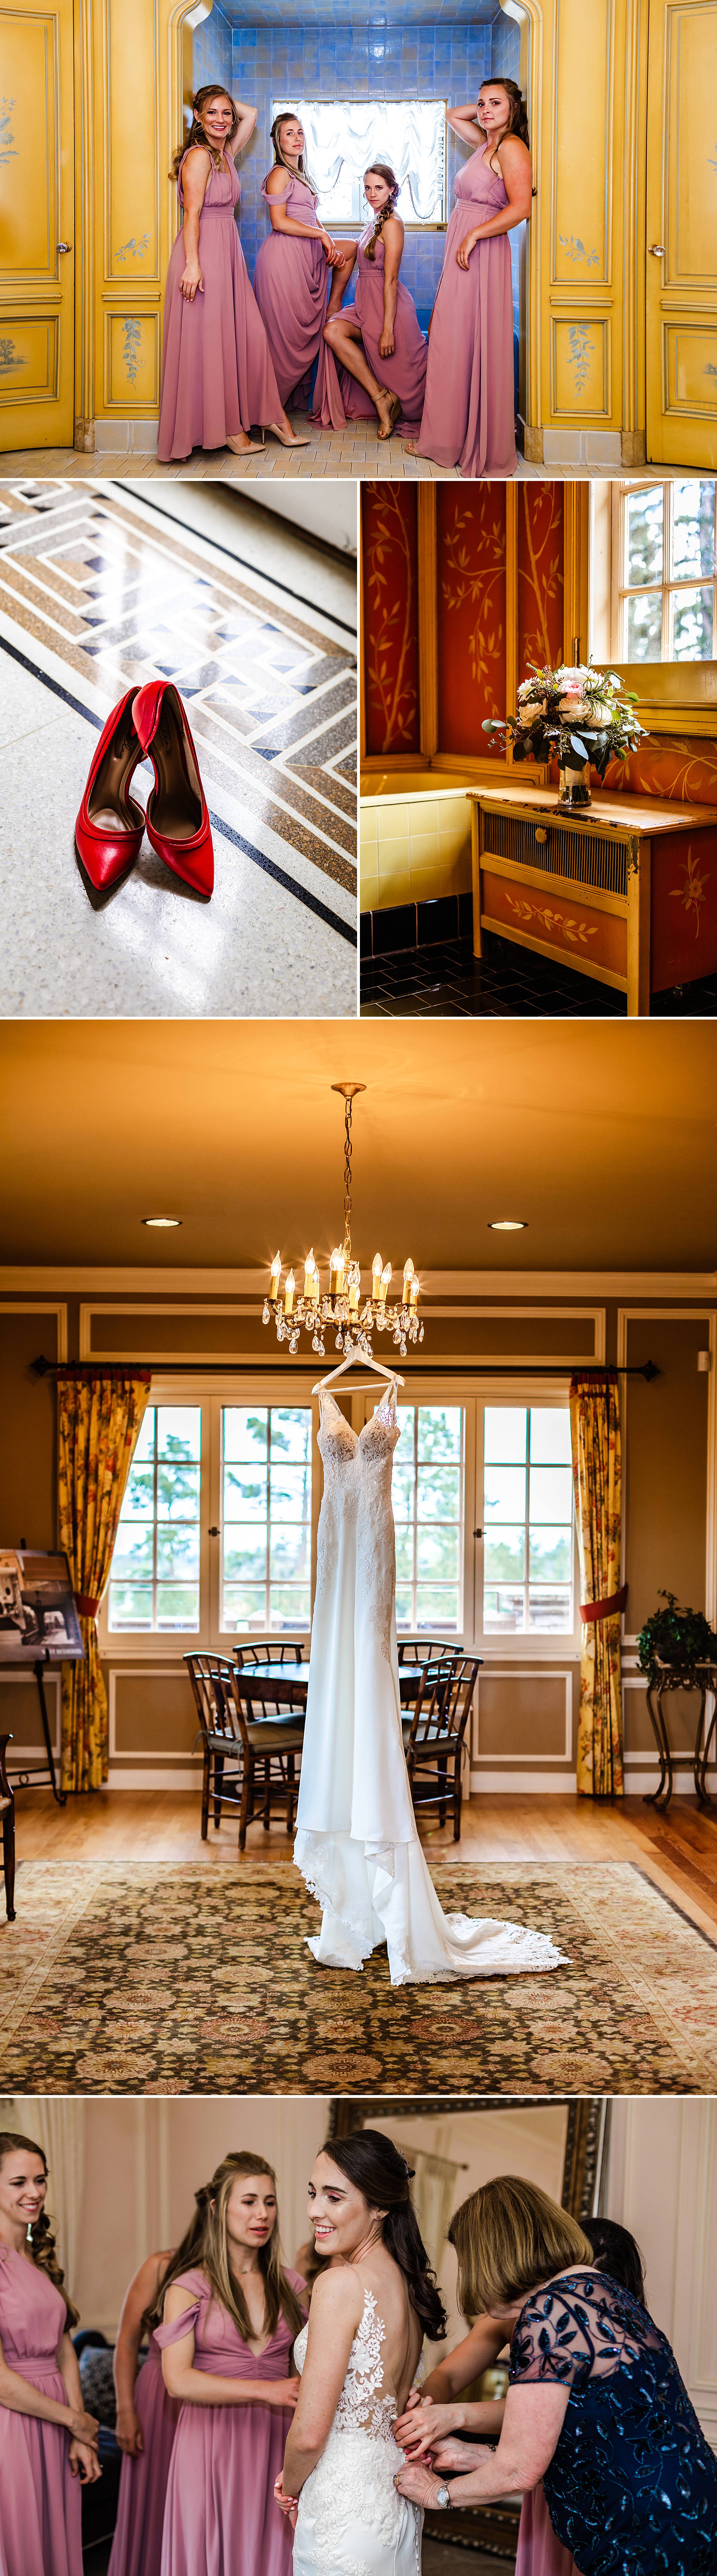 Bride and bridesmaids getting ready in bridal suite at Highlands Ranch Mansion